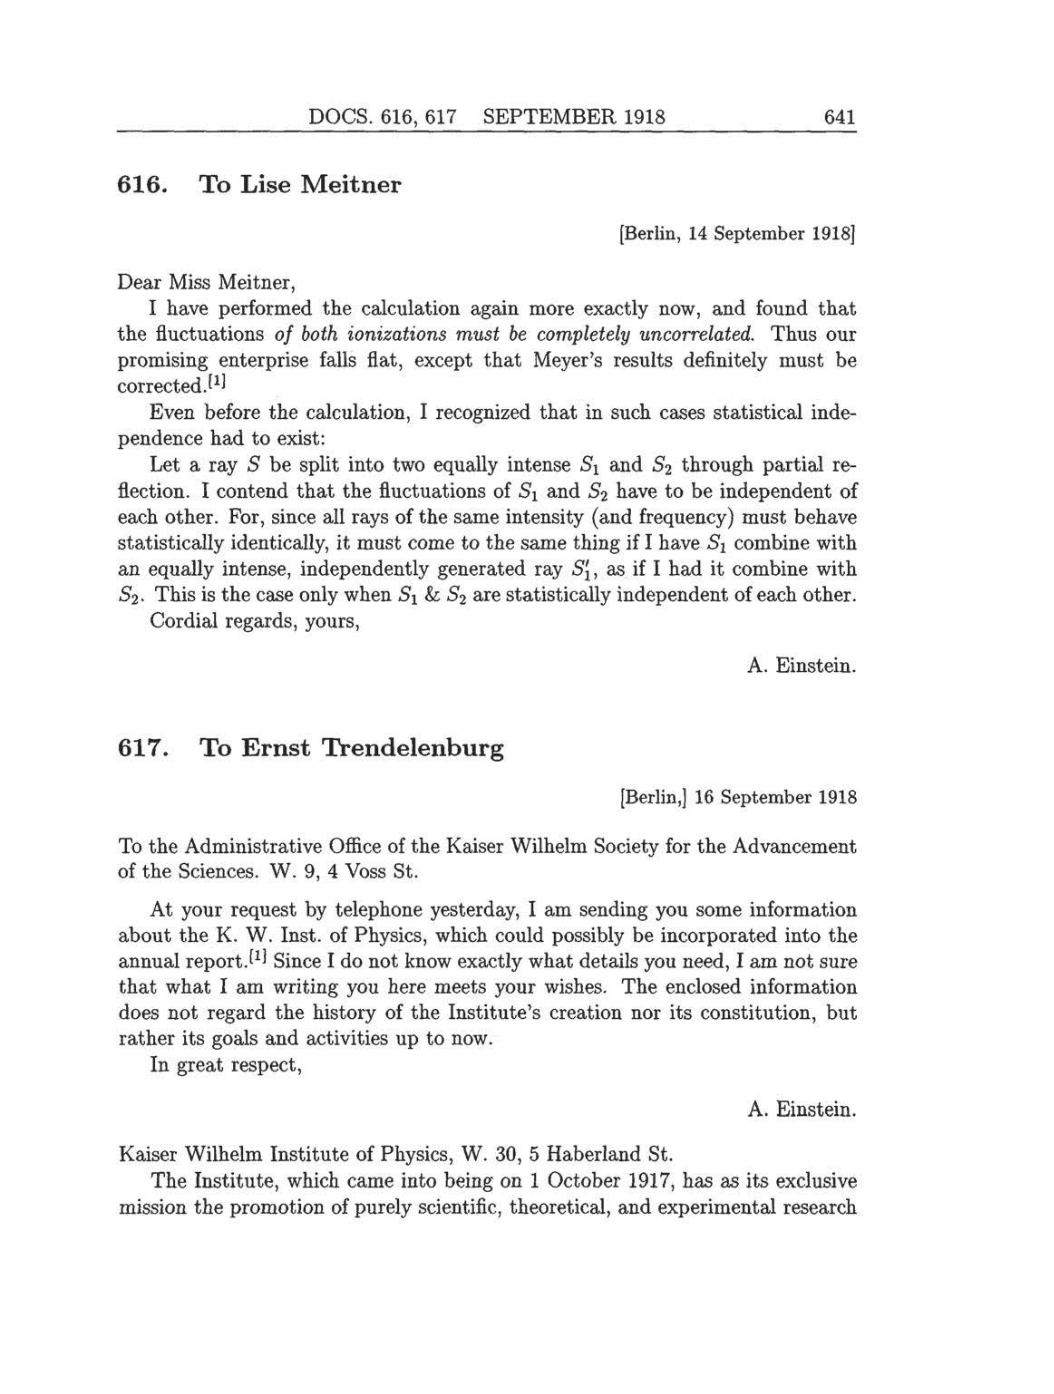 Volume 8: The Berlin Years: Correspondence, 1914-1918 (English translation supplement) page 641